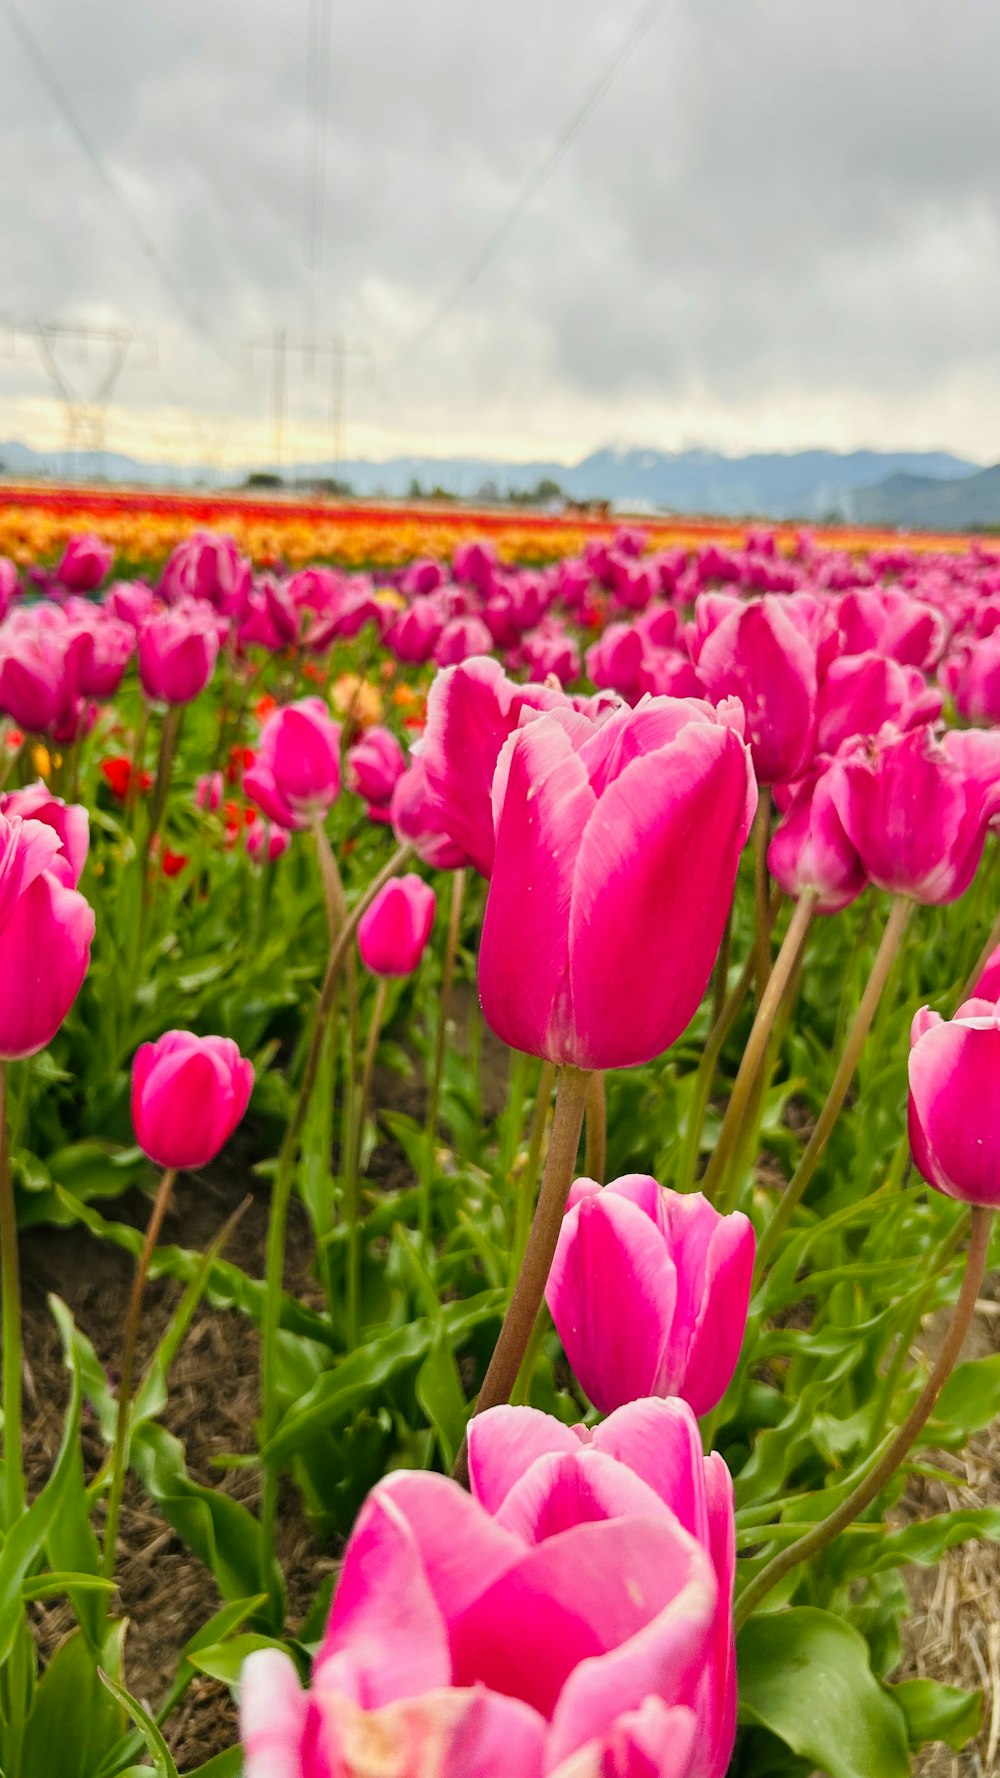 a field full of pink tulips under a cloudy sky